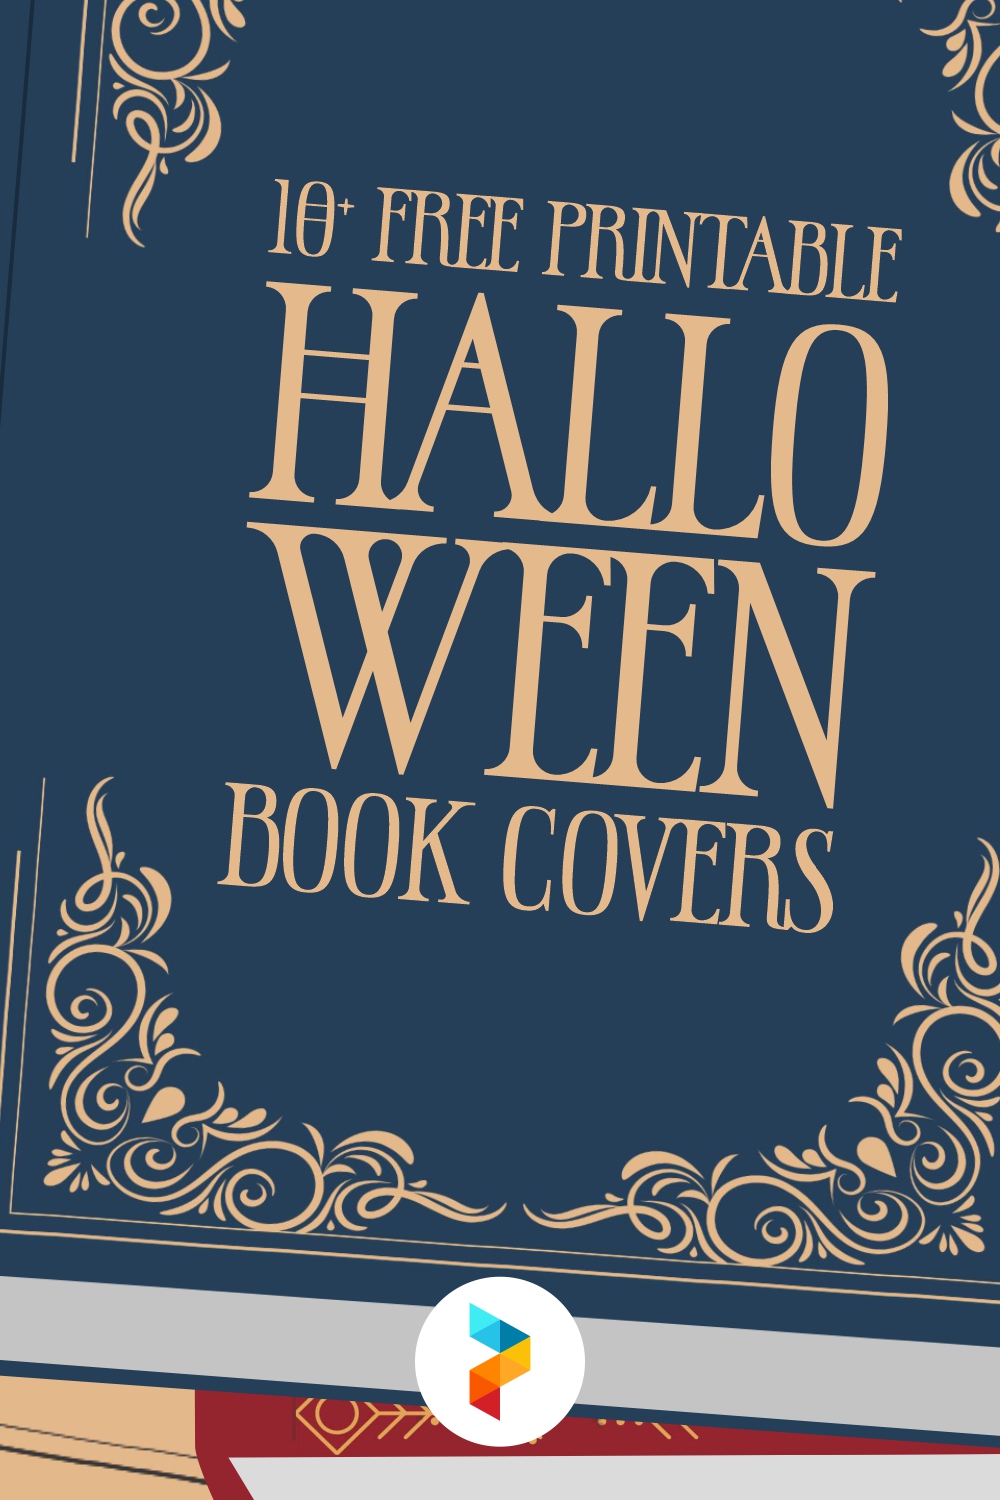 15 Best Free Printable Halloween Book Covers PDF For Free At Printablee